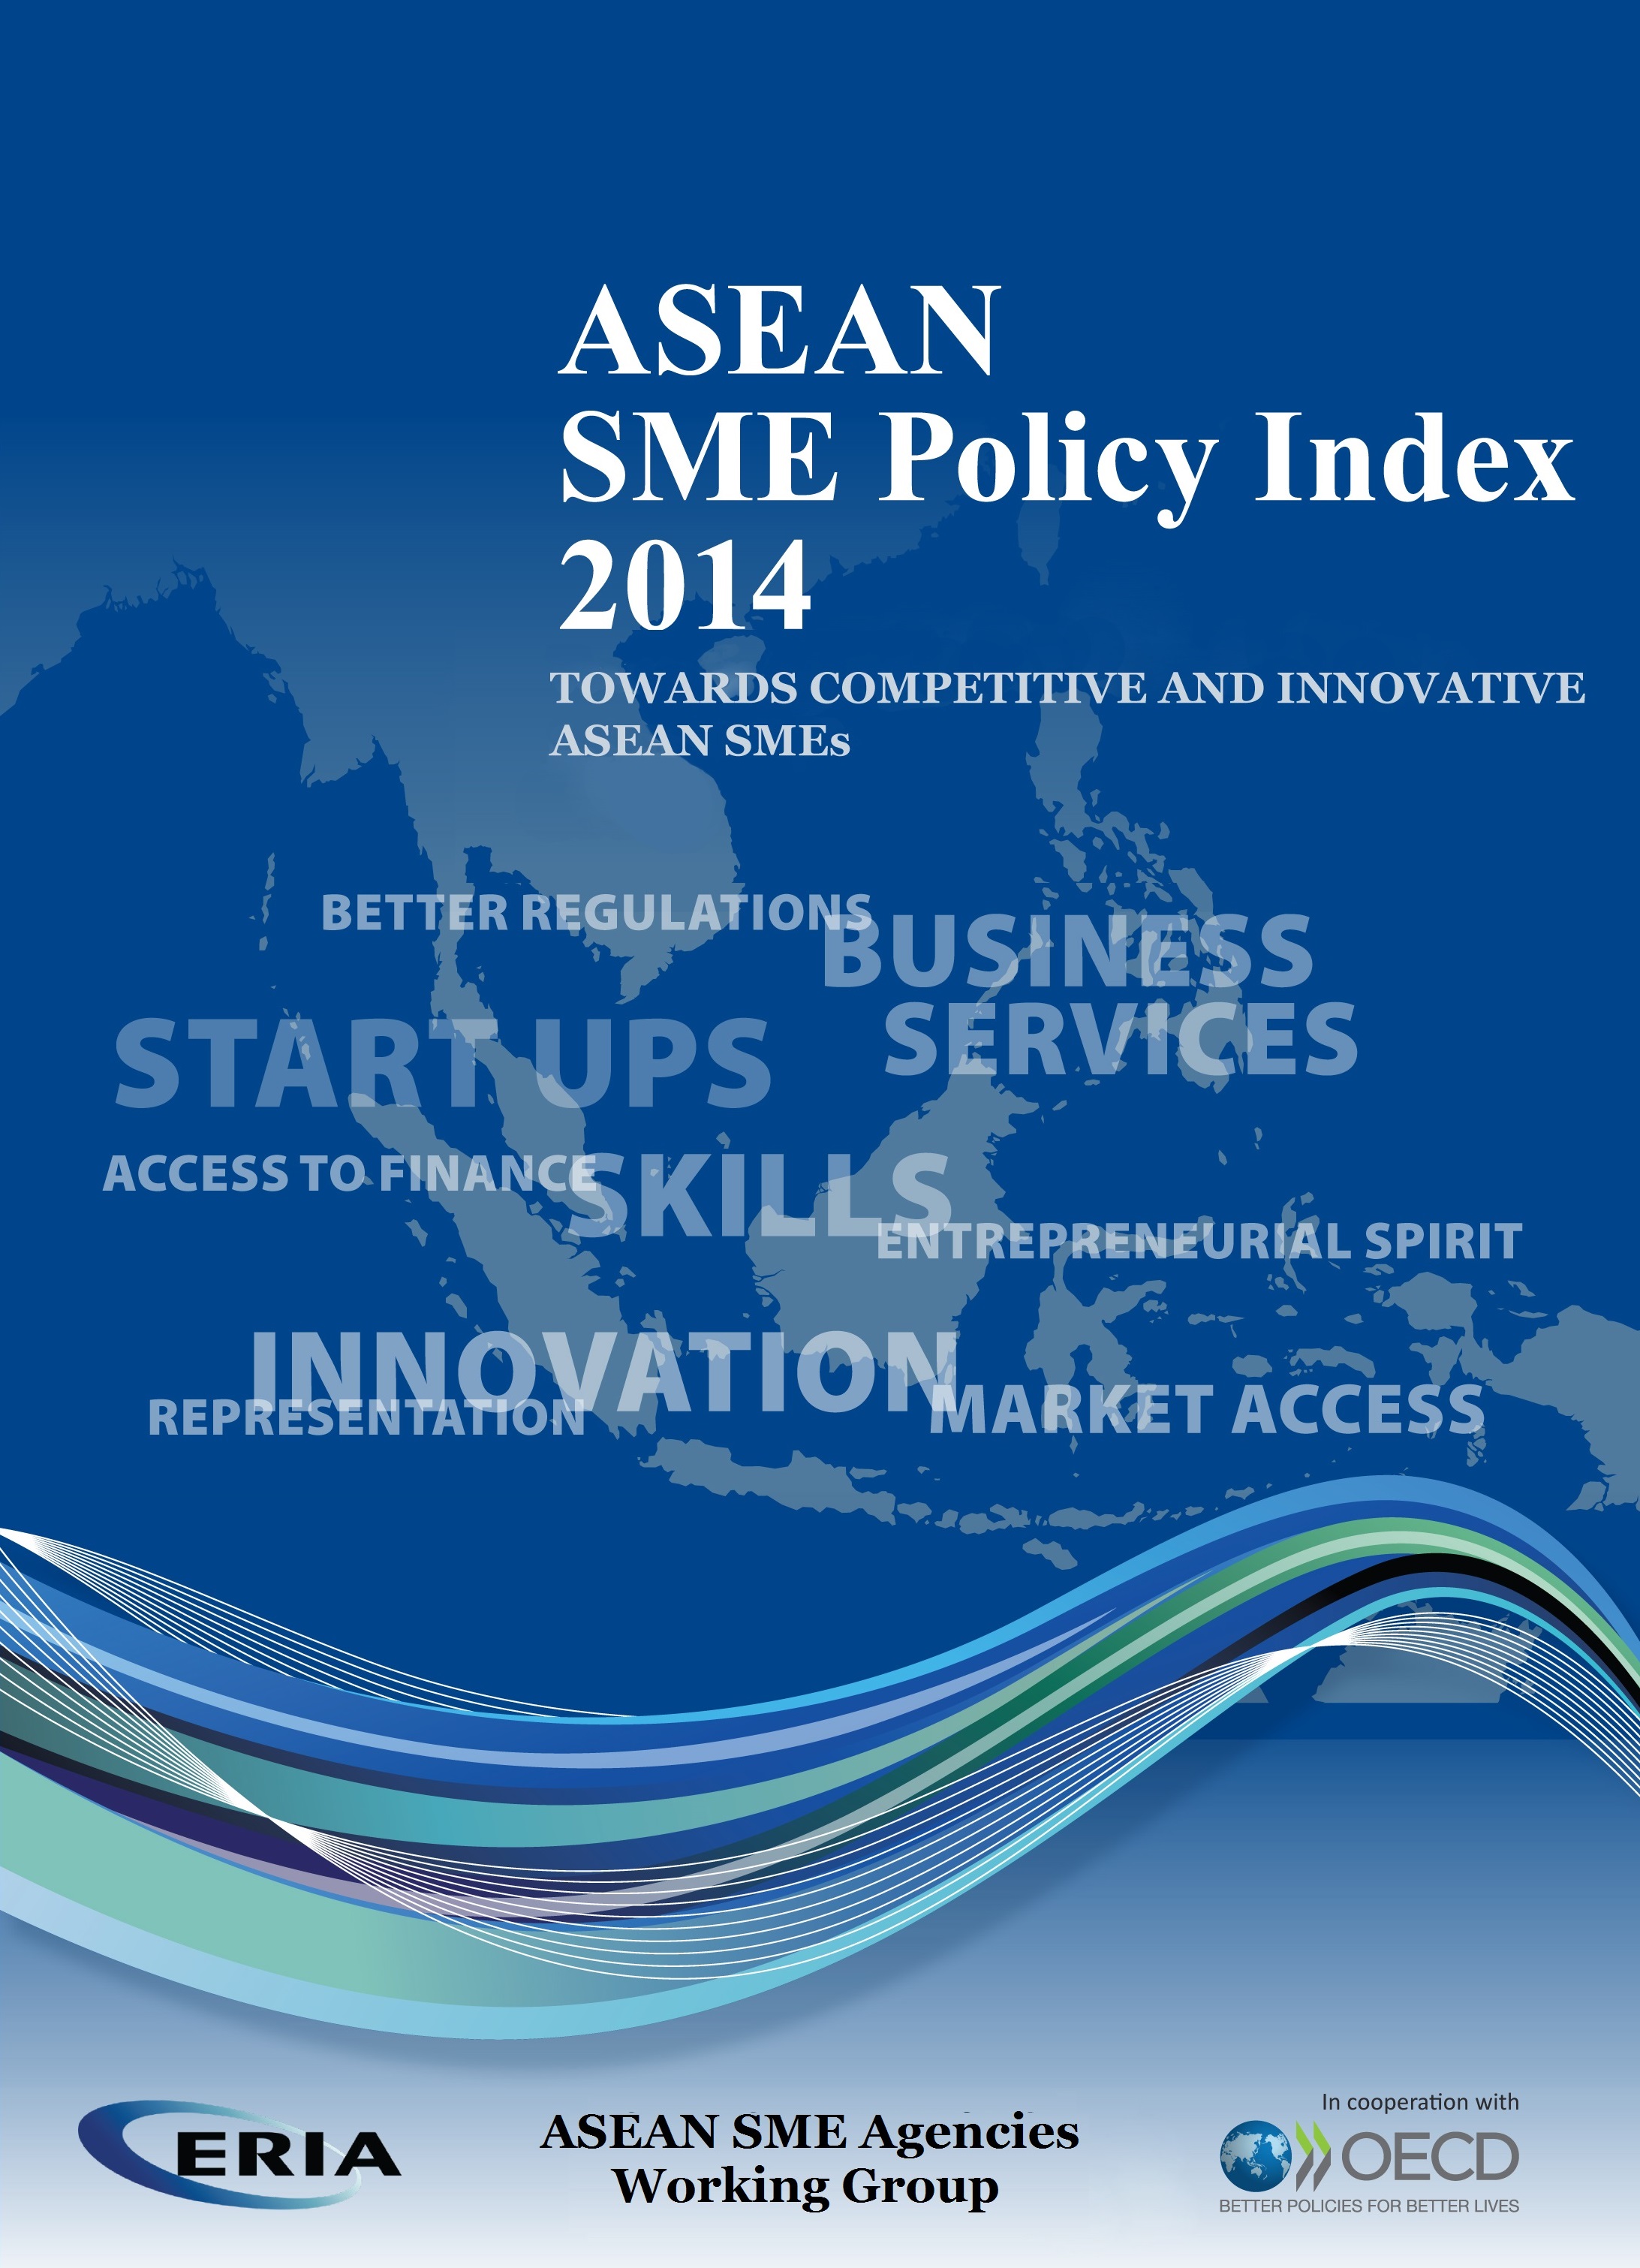 ASEAN SME Policy Index 2014 Towards Competitive and Innovative ASEAN SMEs